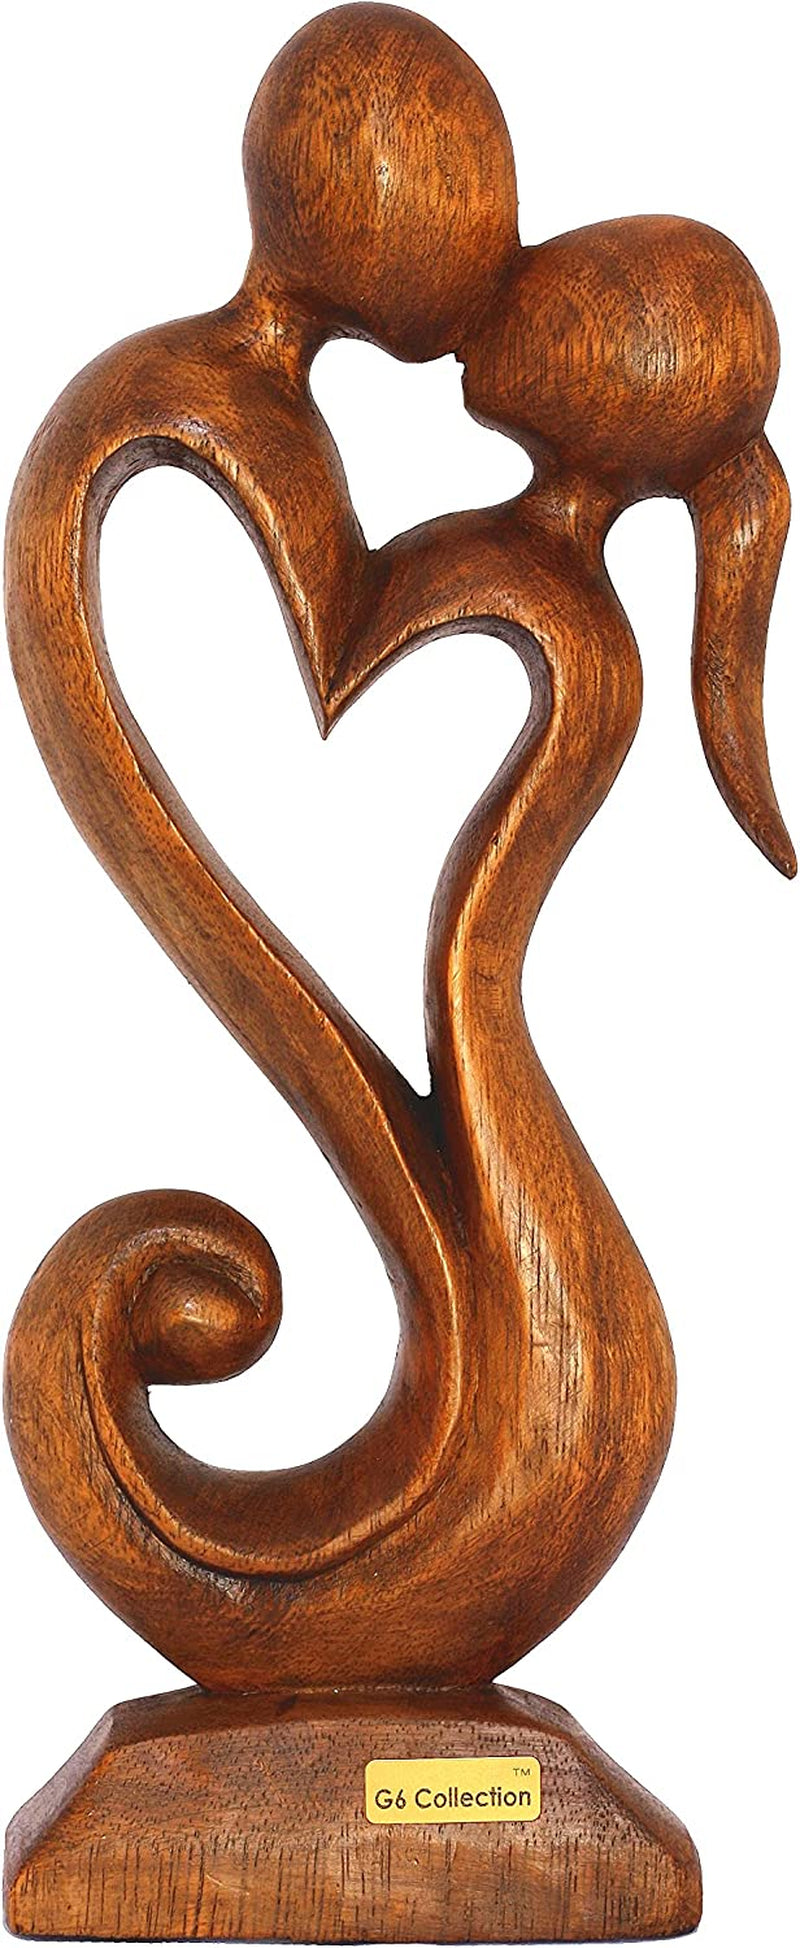 G6 Collection 12" Wooden Handmade Abstract Sculpture Statue Handcrafted - Eternal Love - Gift Art Decorative Home Decor Figurine Accent Decoration Artwork Hand Carved